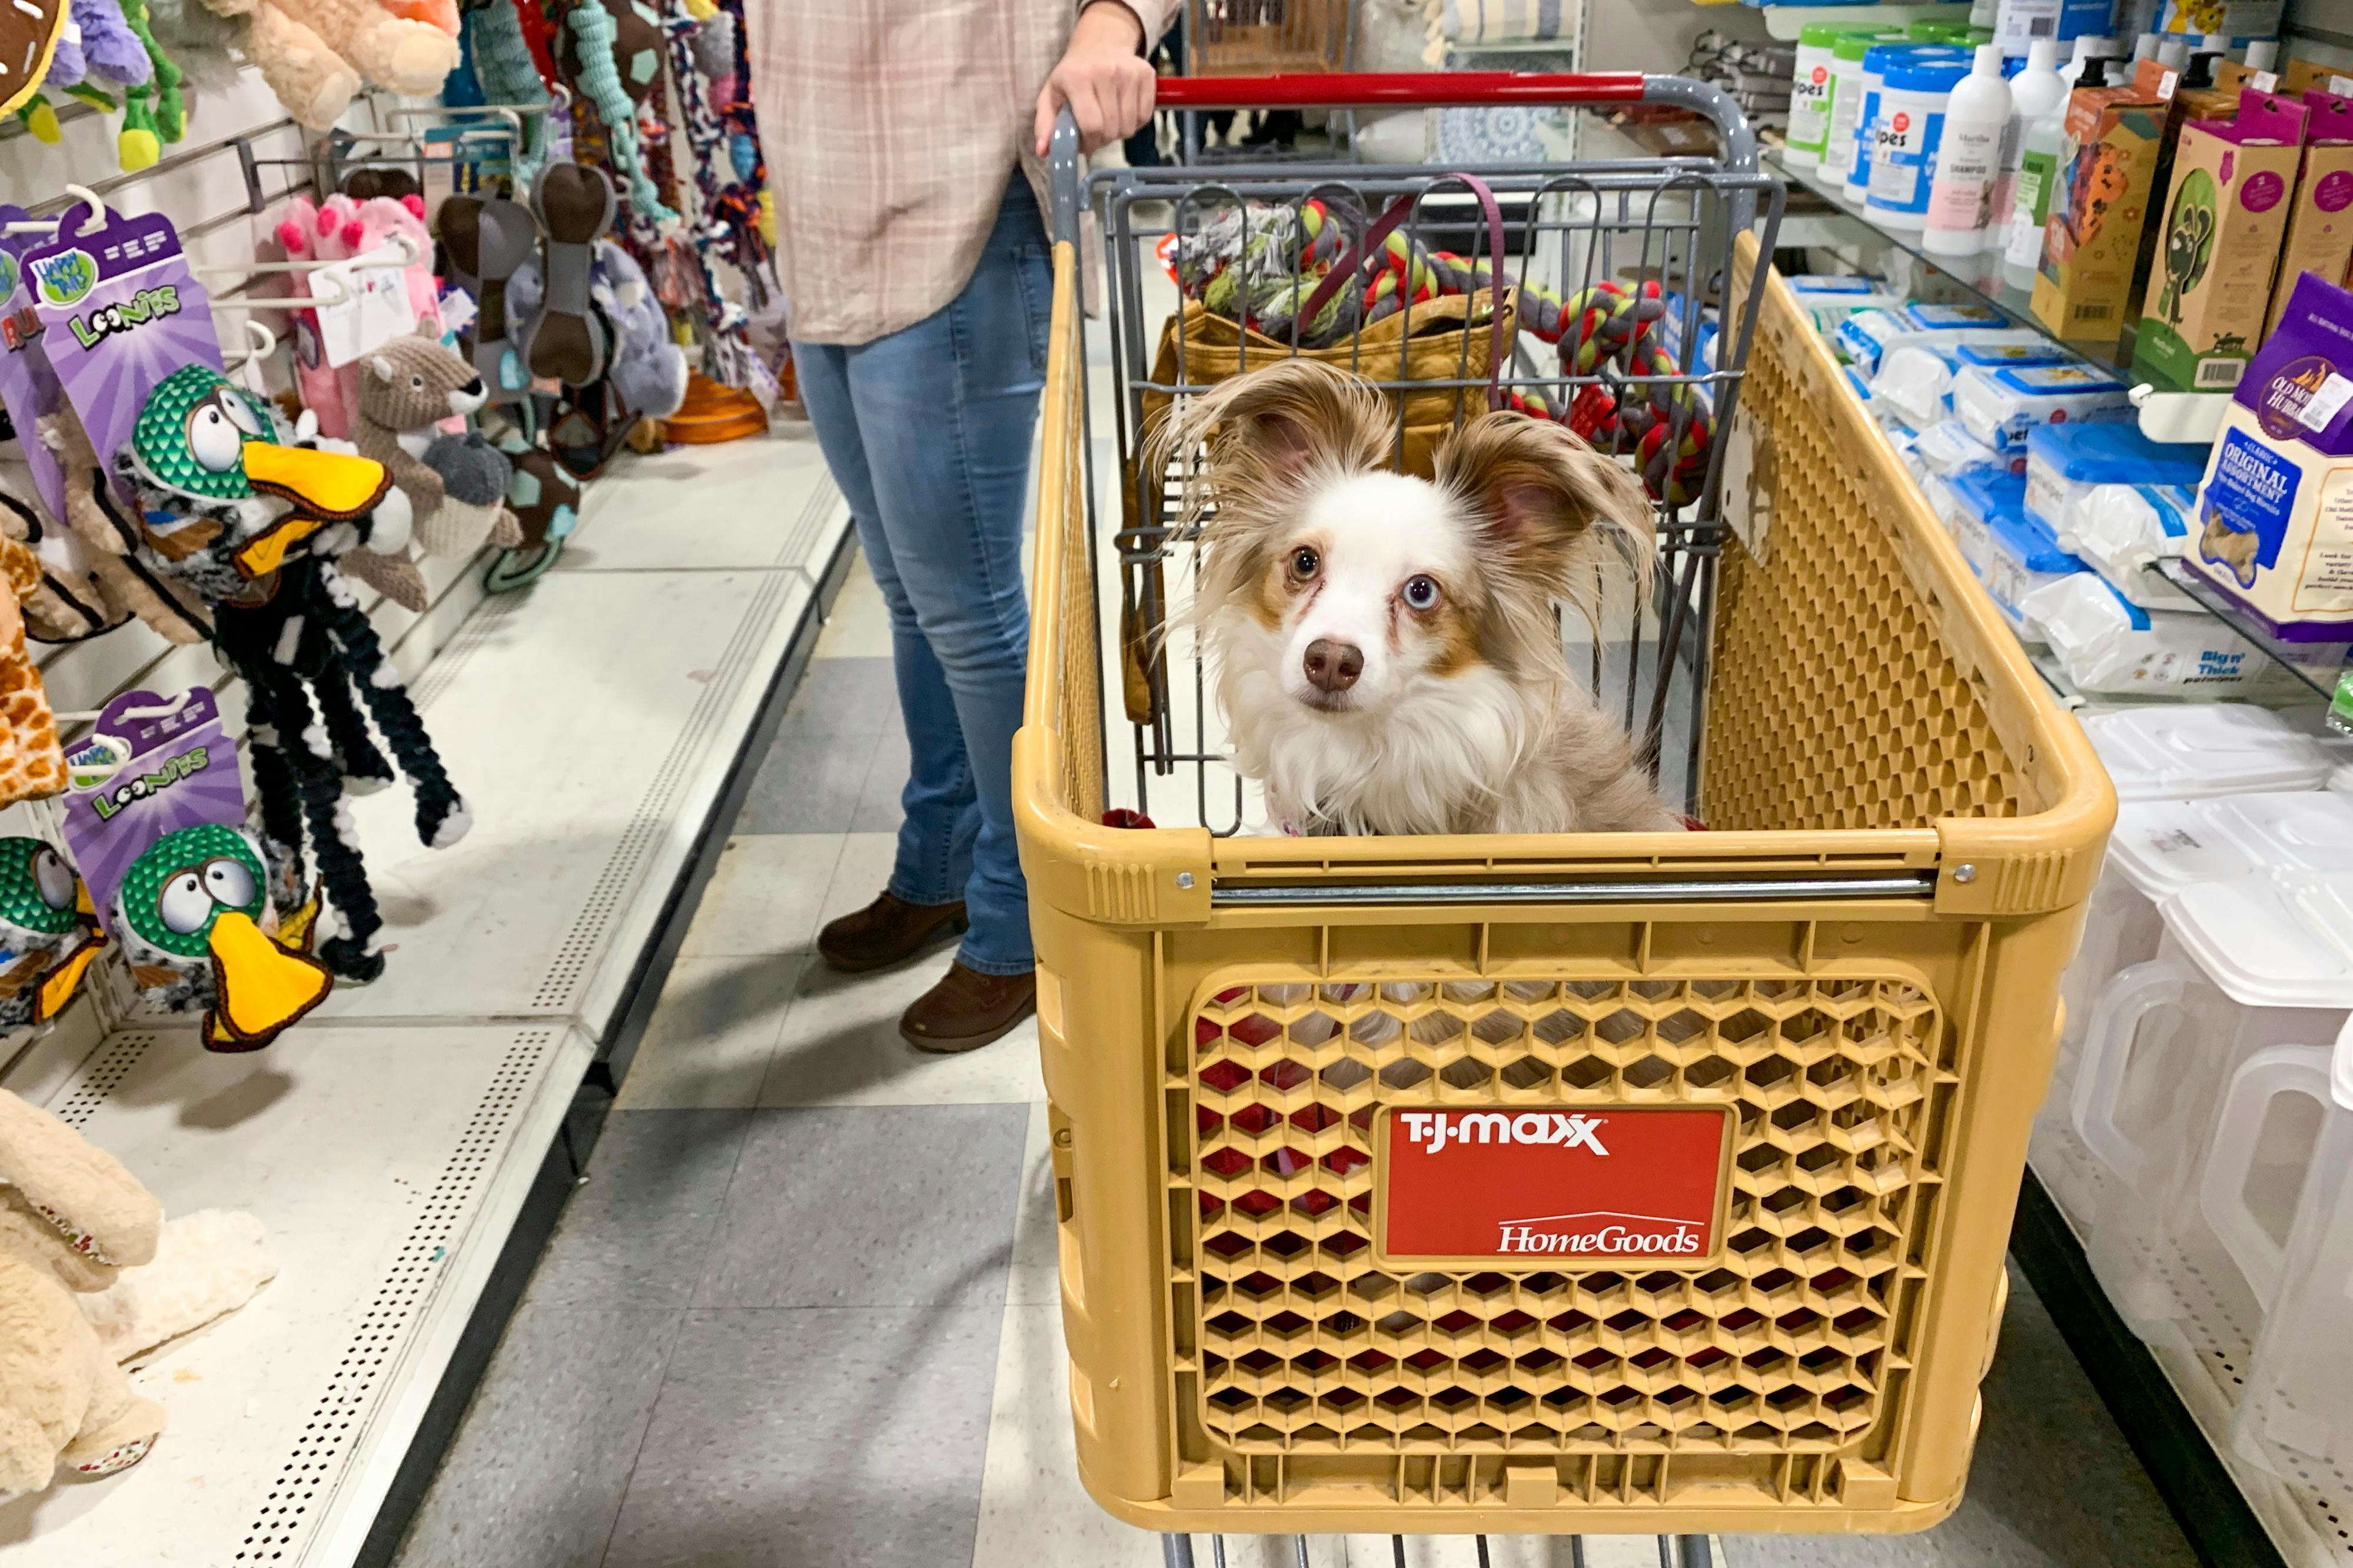 47 Dog-Friendly Stores Across the . - The Krazy Coupon Lady